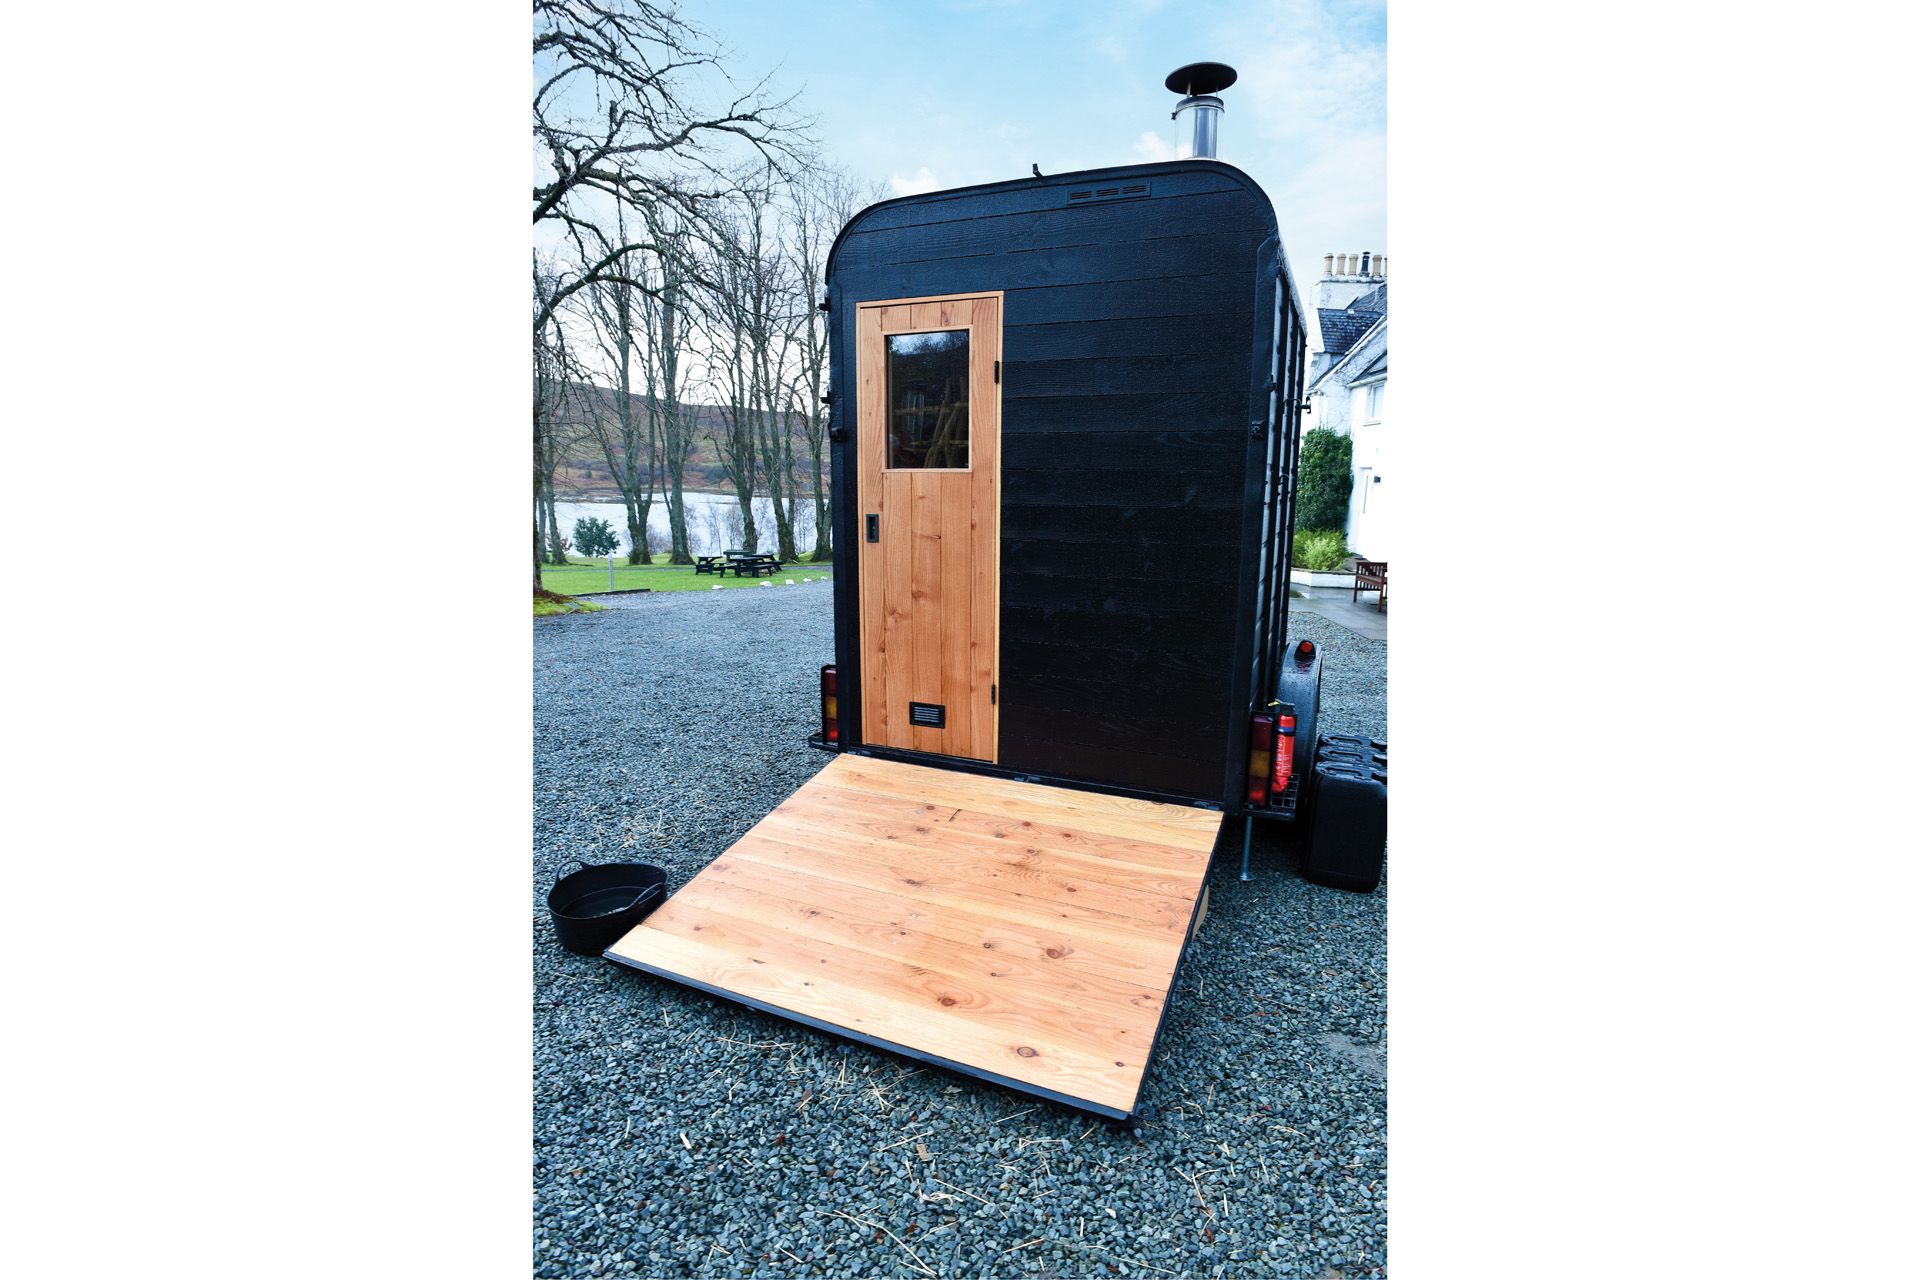 The Sauna Horse box with a Finnish wood-fired stove and handcrafted with carefully sourced materials